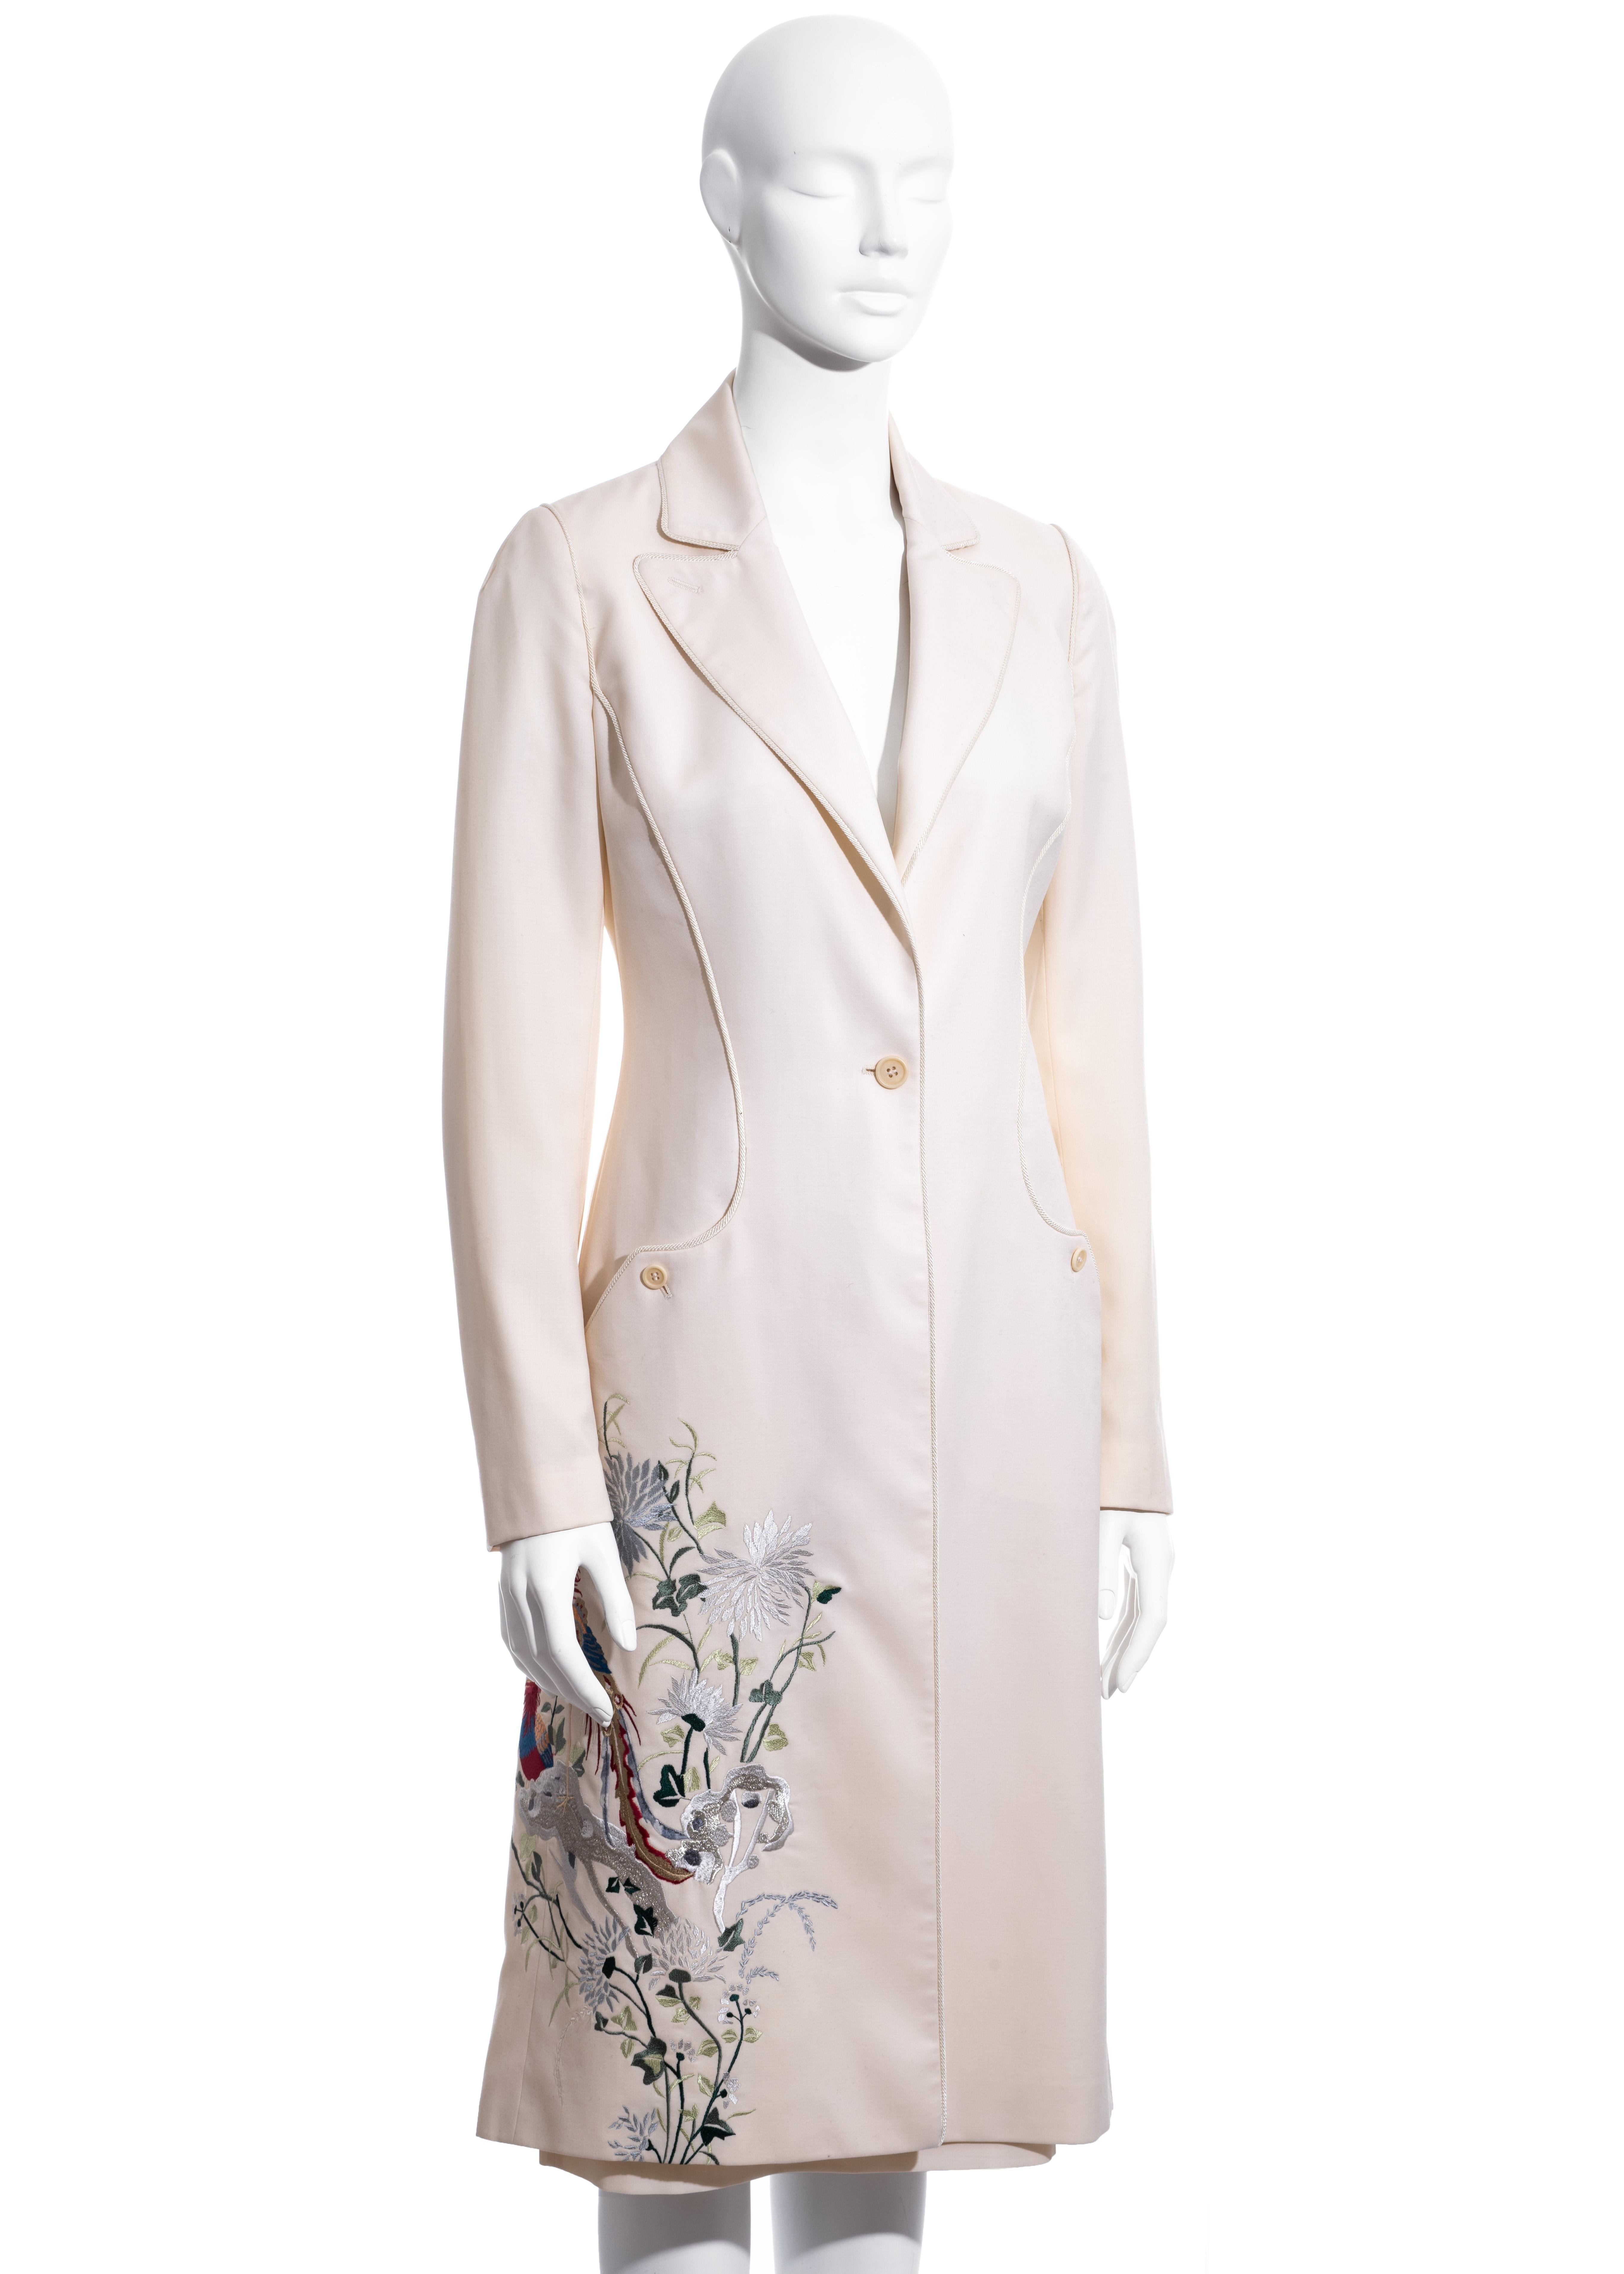 ▪ Alexander McQueen ivory wool skirt suit
▪ Long blazer jacket 
▪ Multicoloured embroidery 
▪ Ribbon piping 
▪ Two front pockets
▪ Matching pencil skirt
▪ IT 42 - FR 38 - UK 10 - US 6
▪ c. 1997-1999